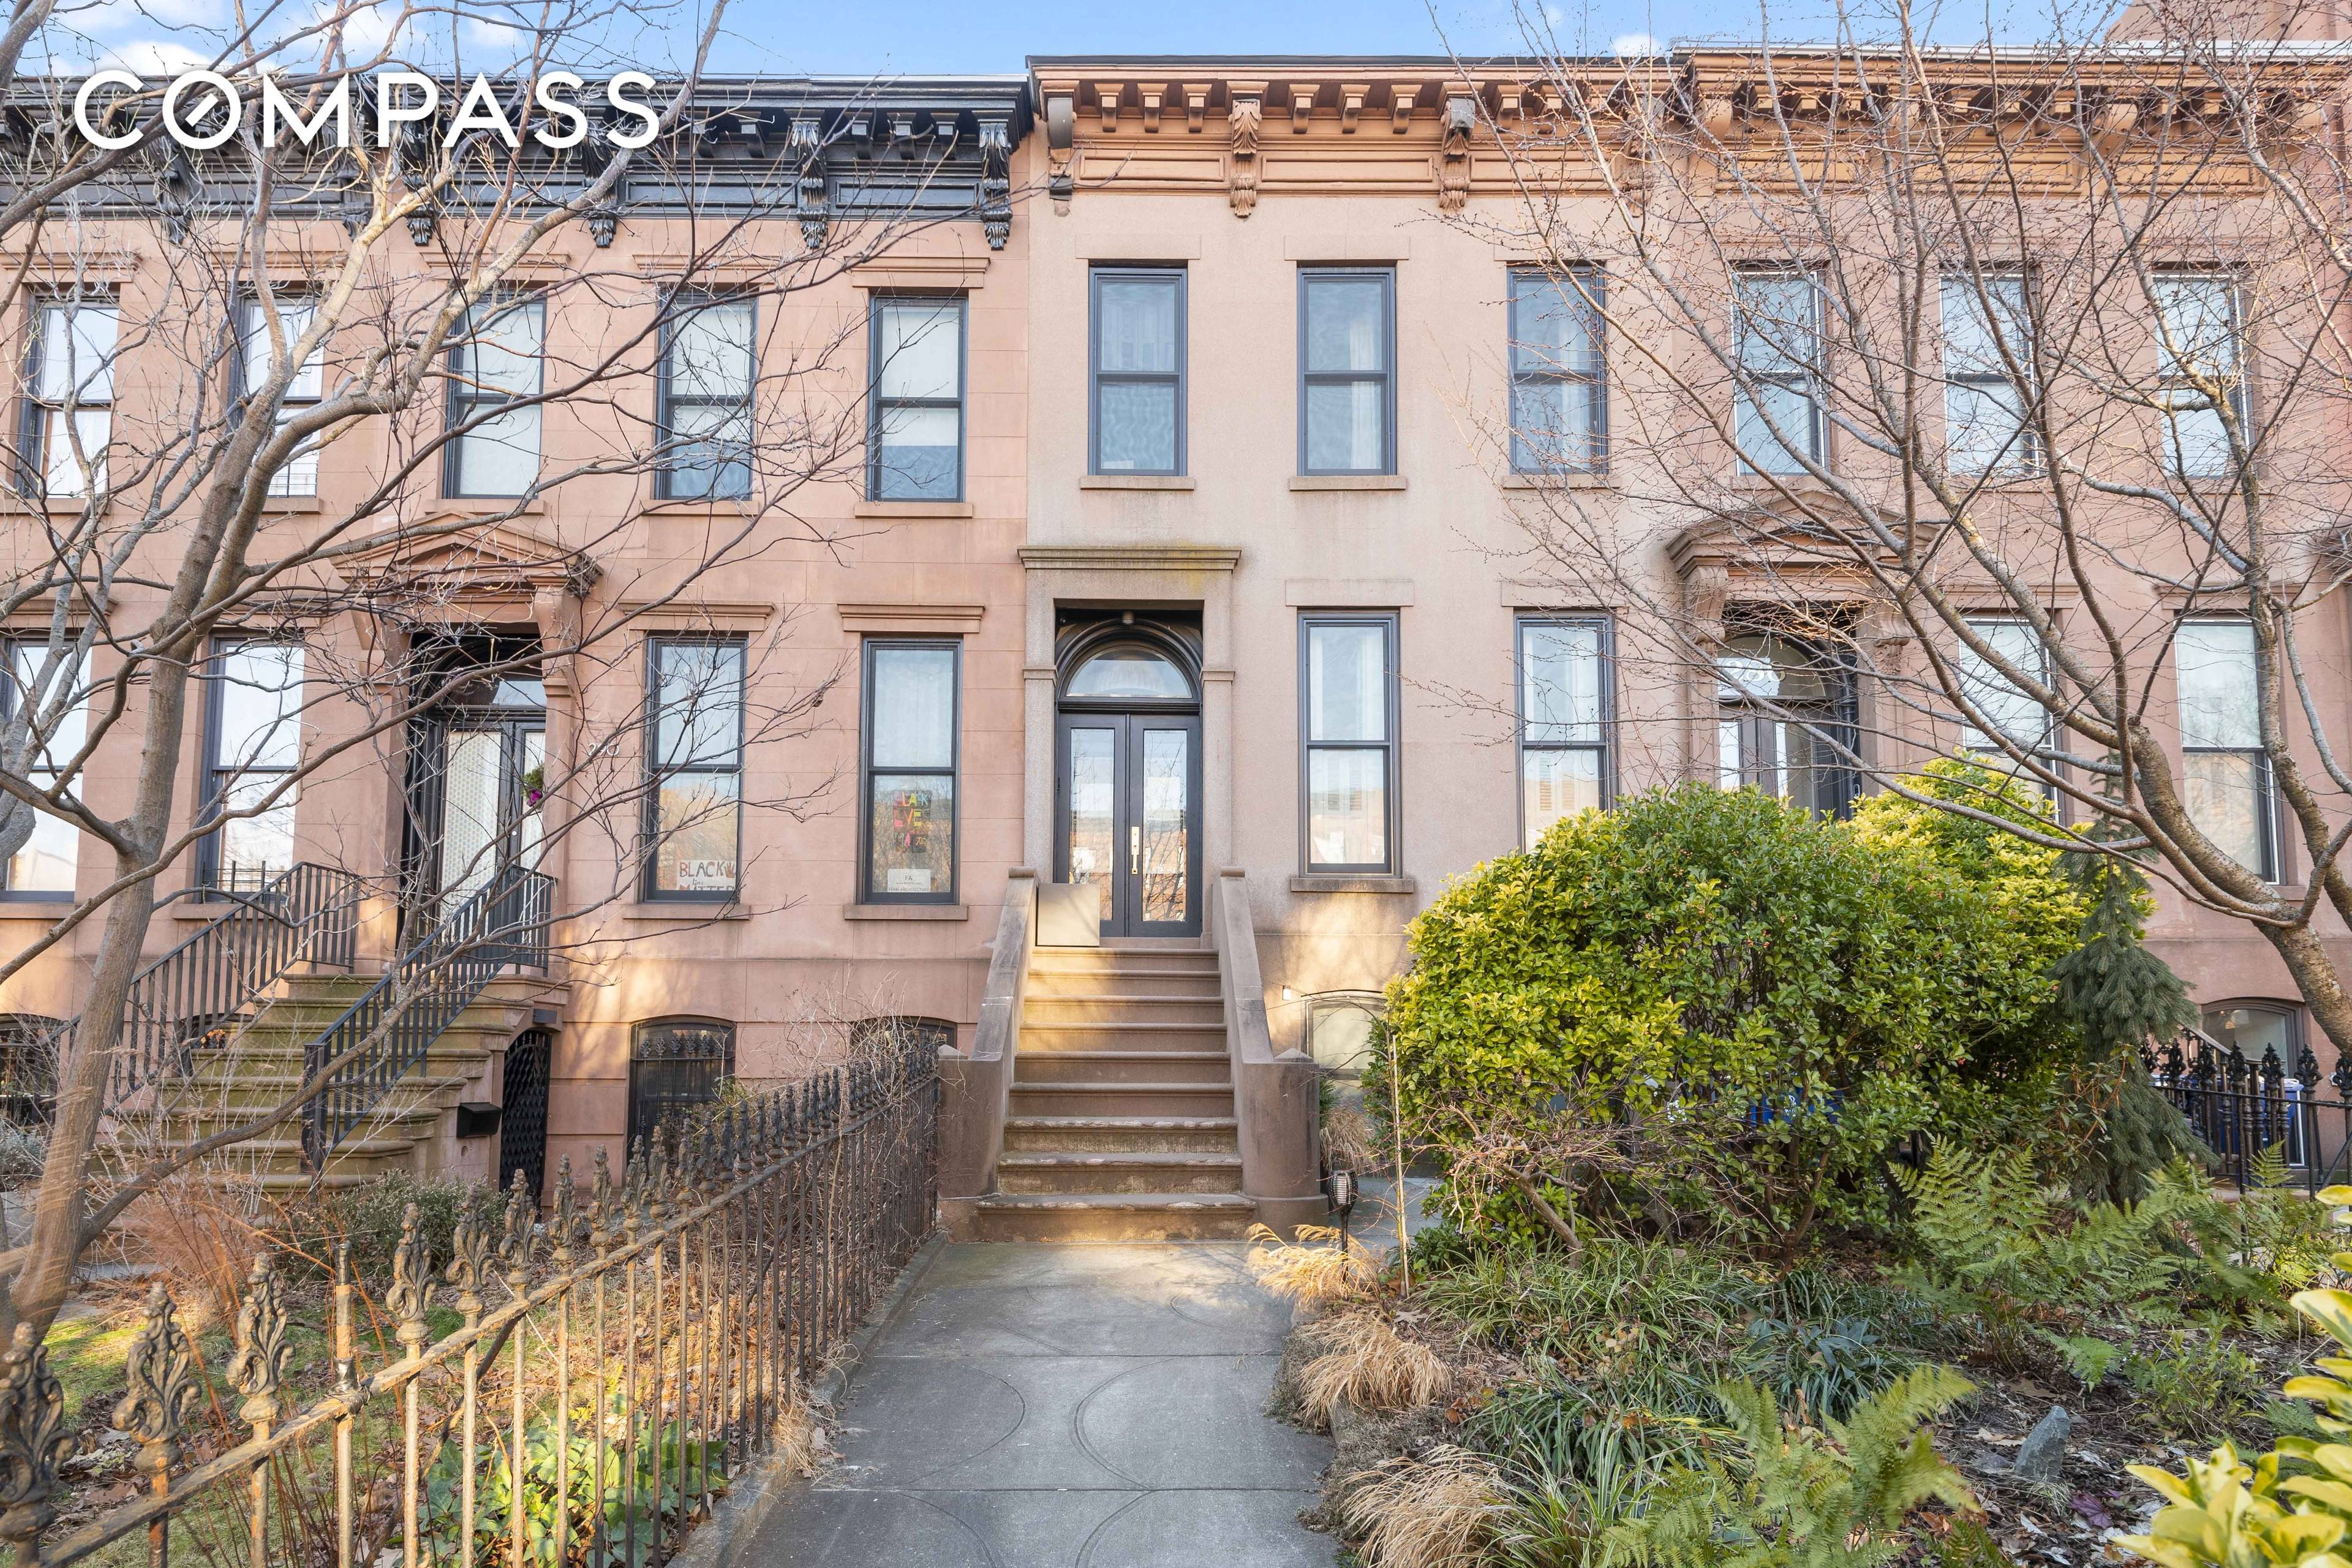 Unexpected surprises abound in this rarely available, triple mint condition Carroll Gardens townhouse !